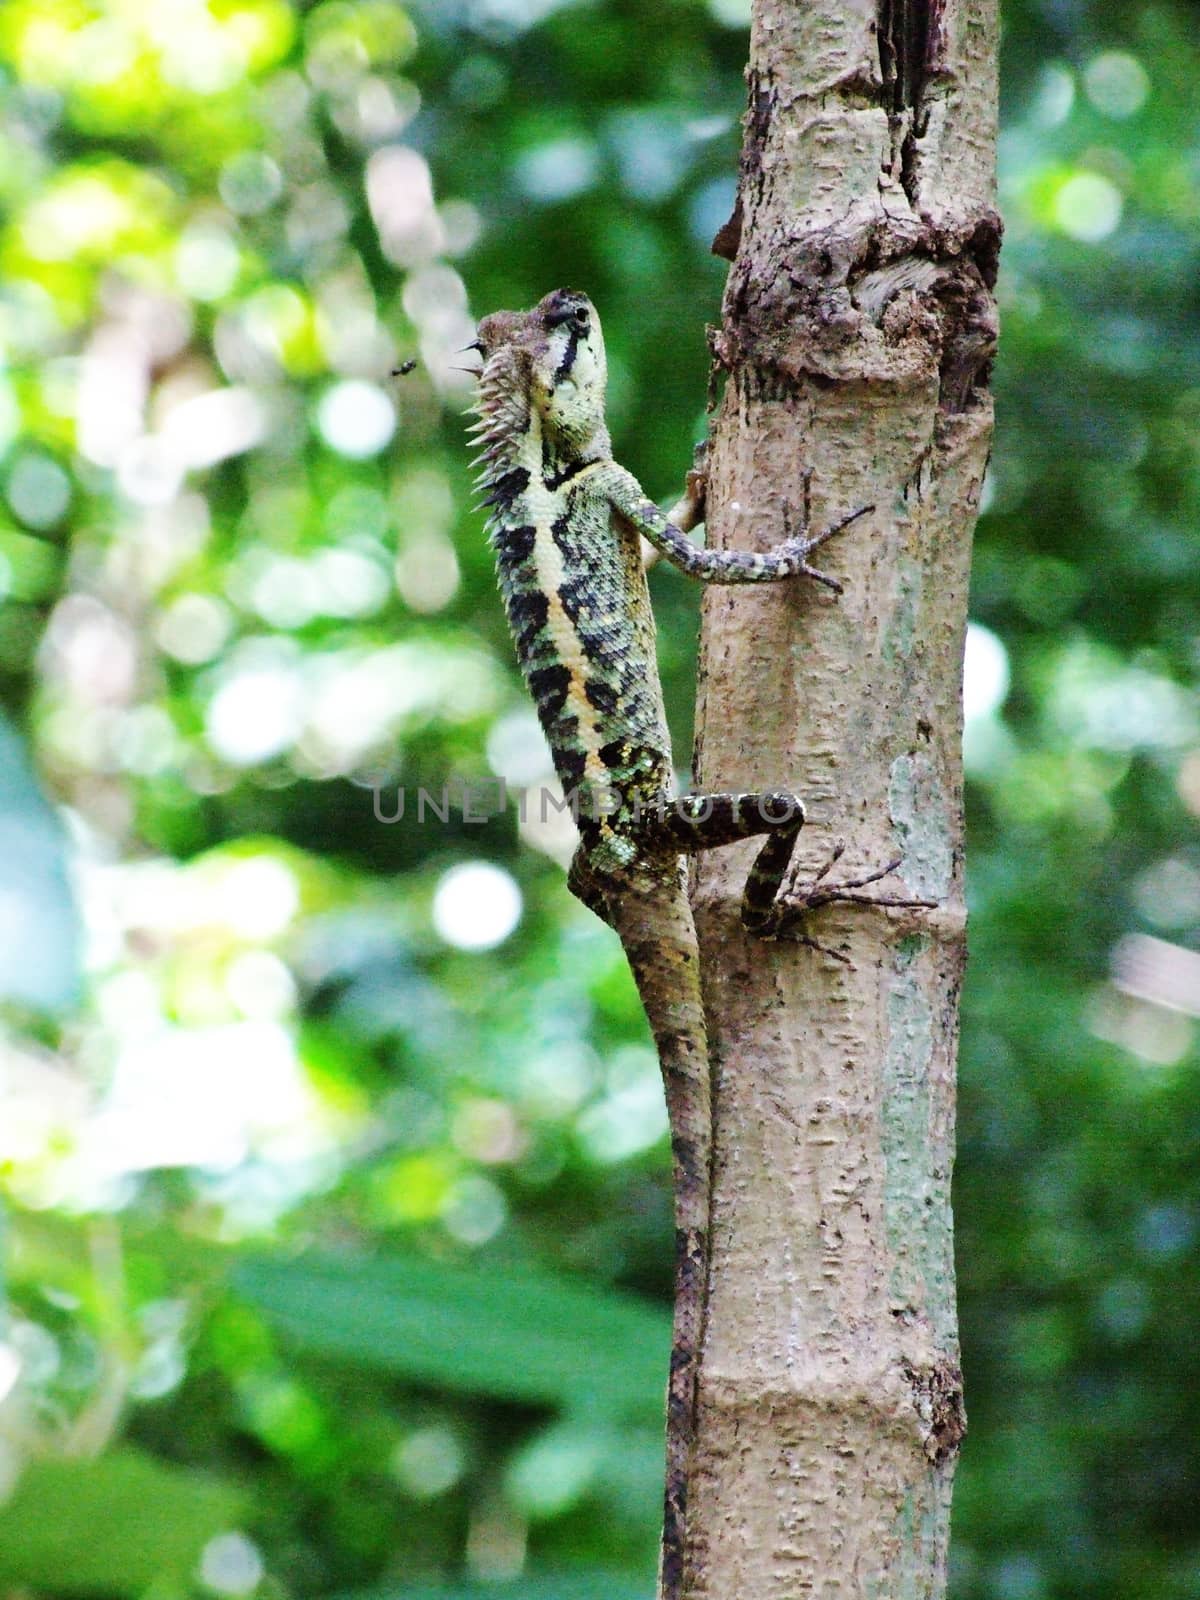 The chameleon is climbing the tree in nature